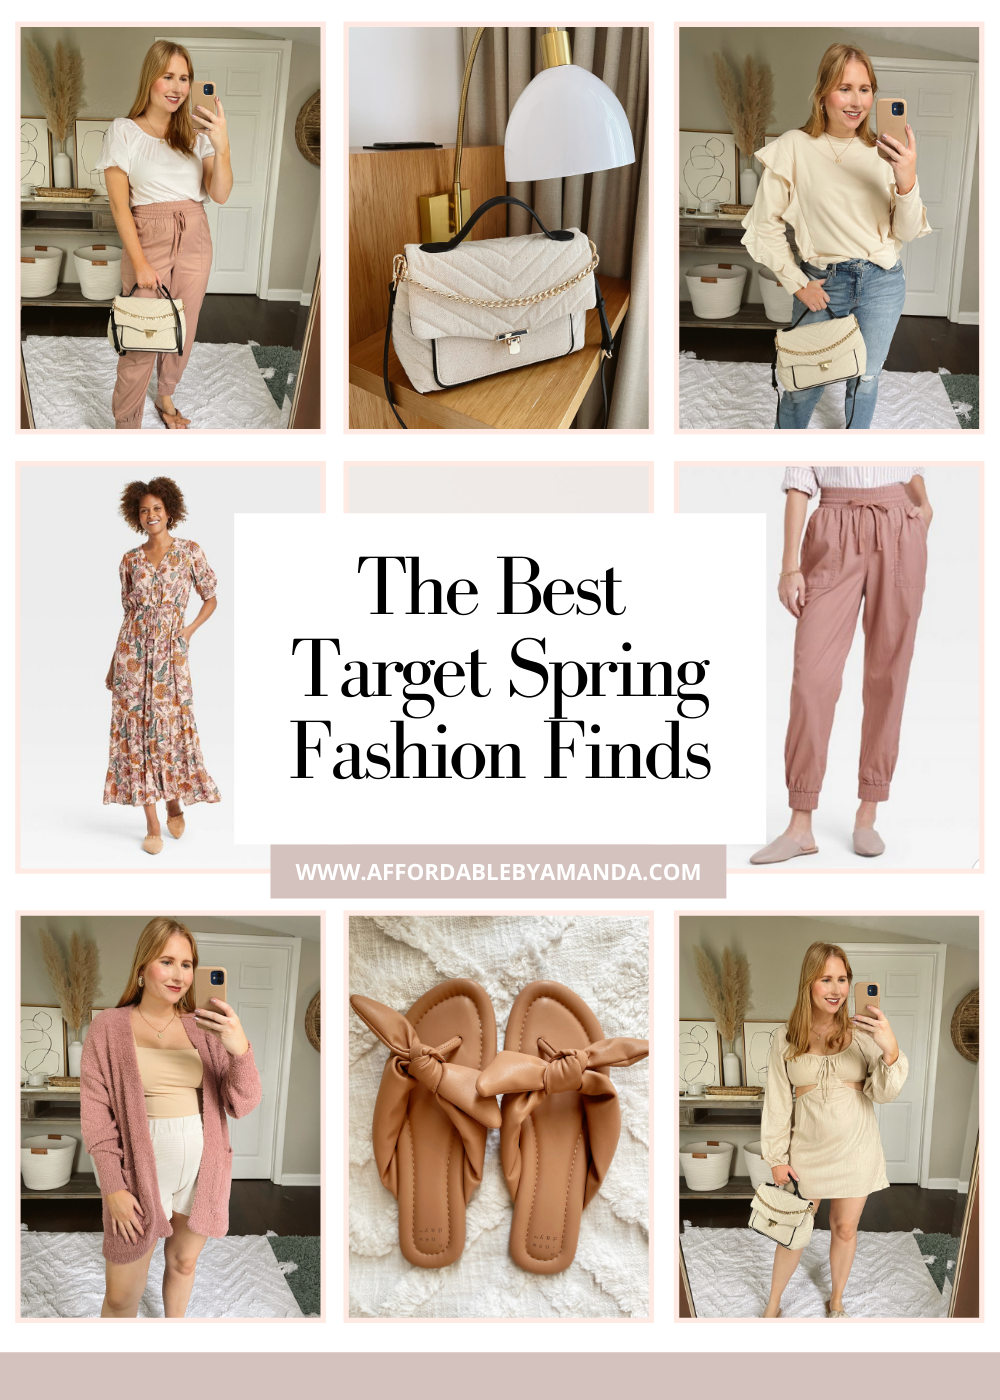 The Best Target Spring Fashion Finds | Affordable by Amanda